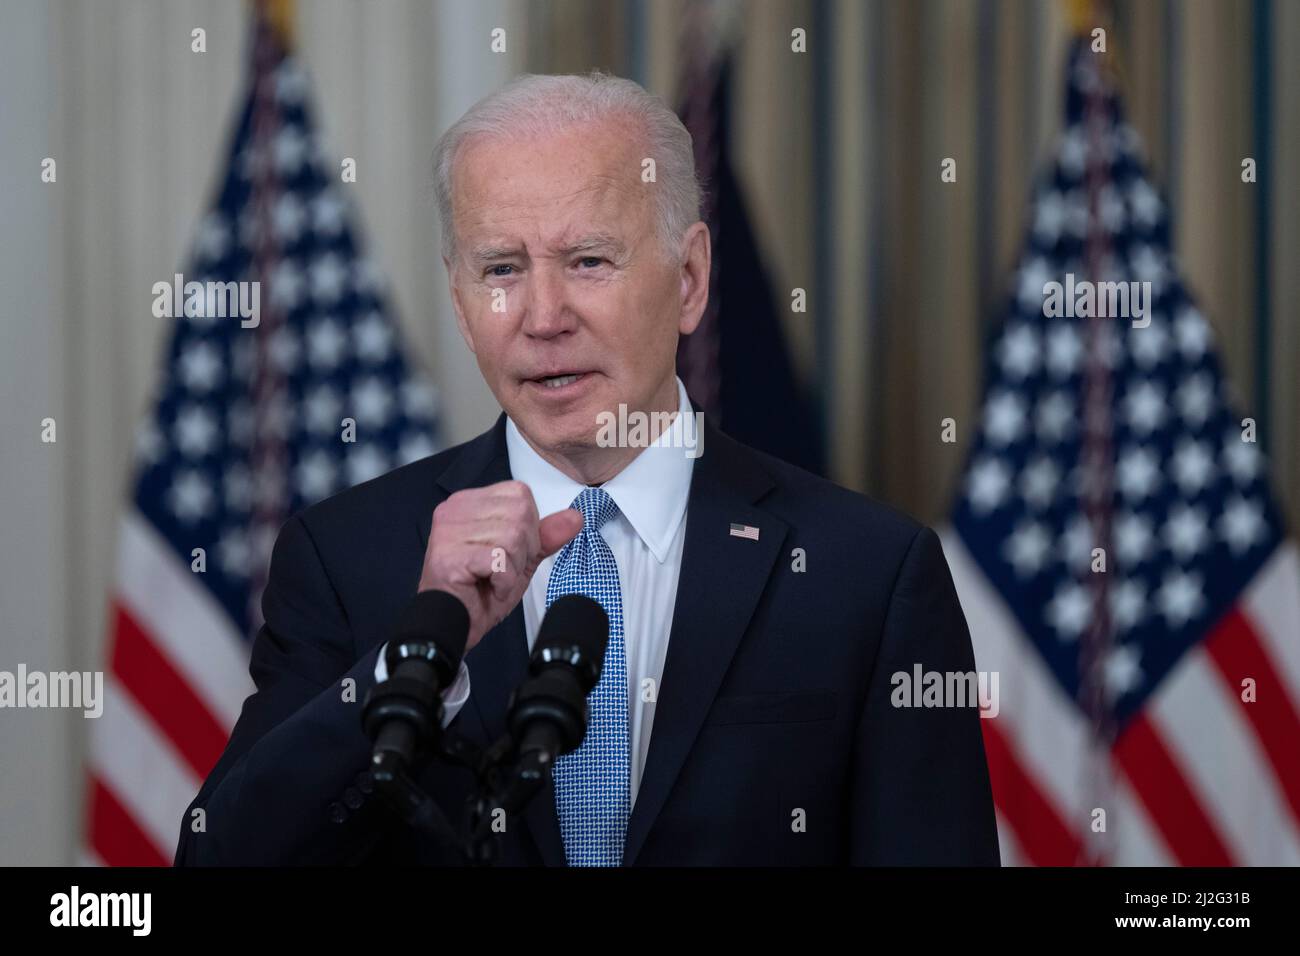 United States President Joe Biden makes remarks on the March jobs report at The White House in Washington, DC, Friday April 1, 2022.Credit: Chris Kleponis/CNP /MediaPunch Stock Photo